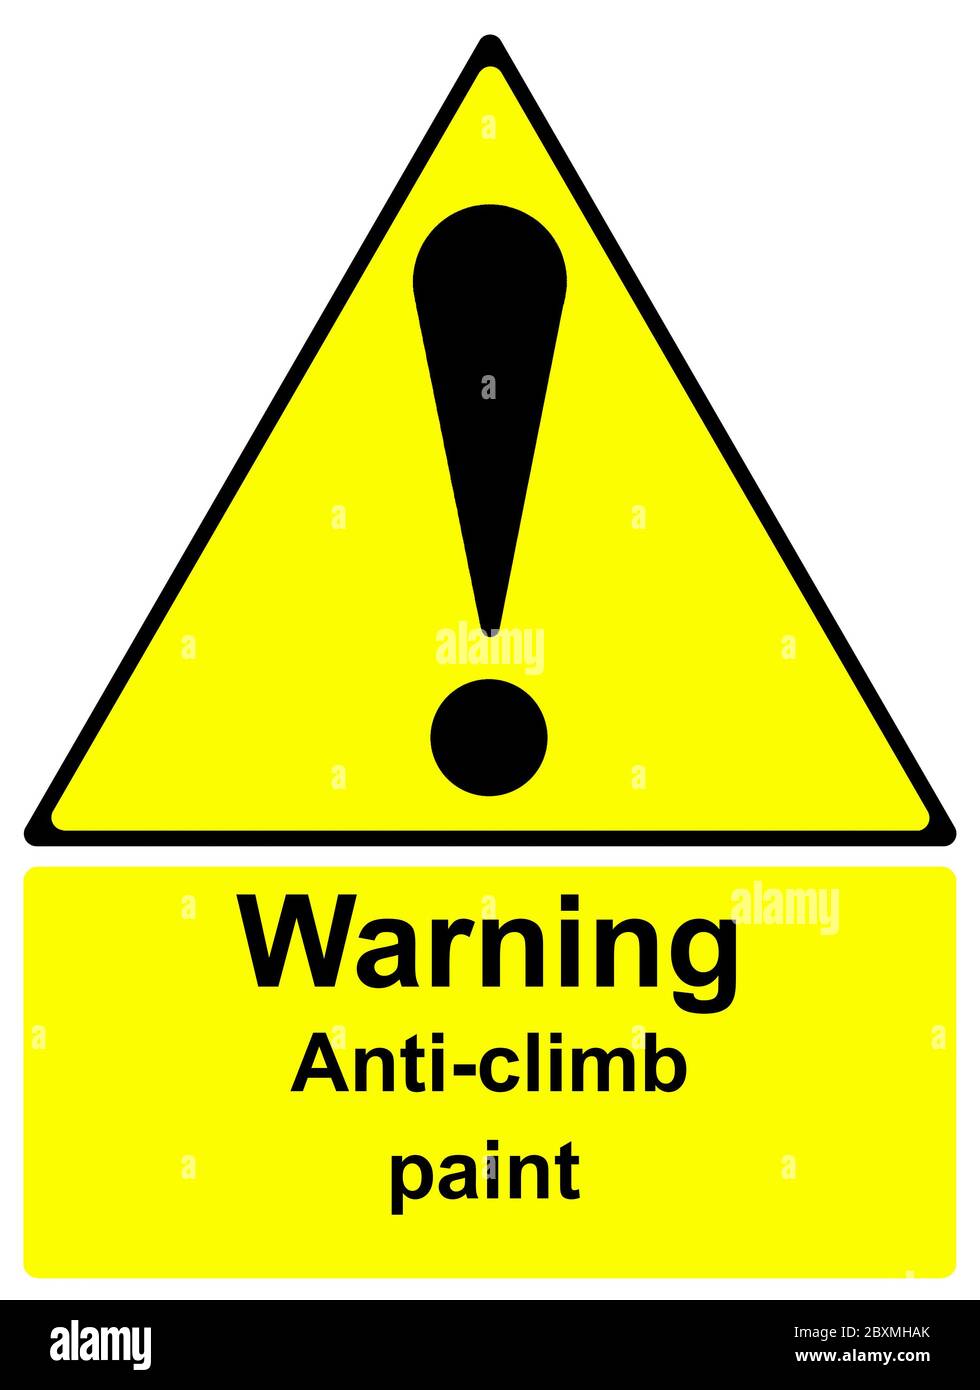 Warning anti-climb paint in this area sign Stock Photo